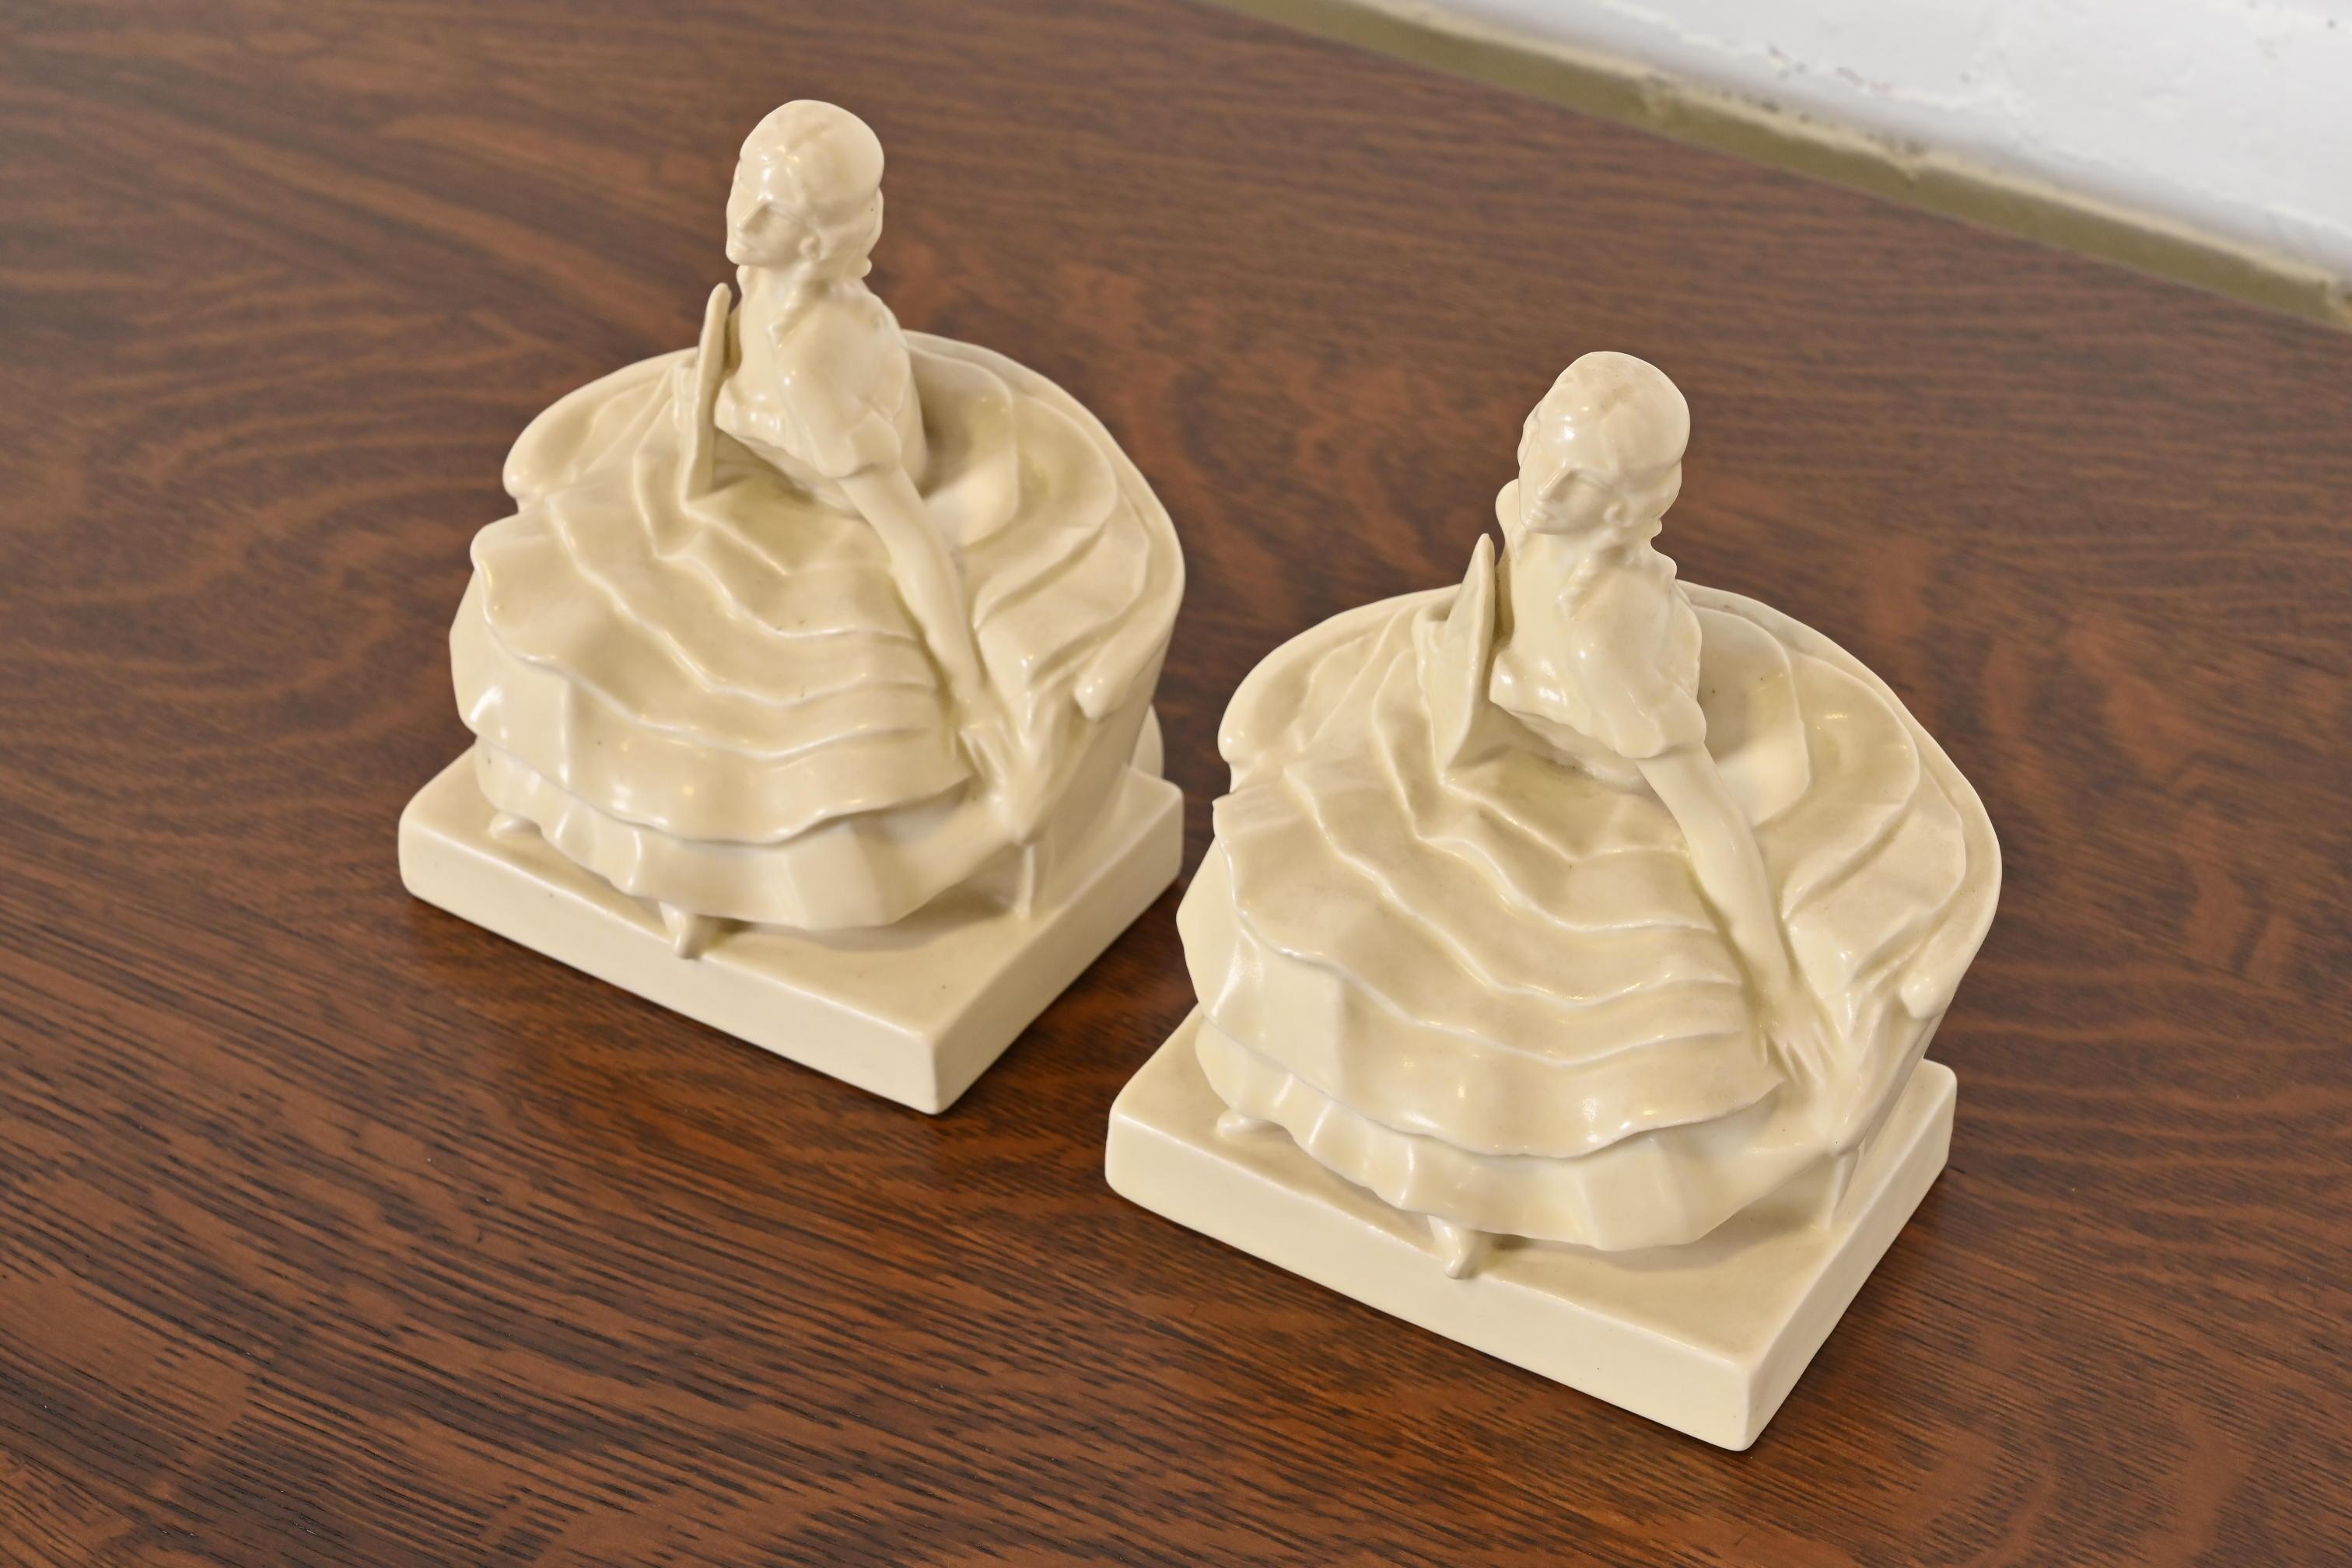 American Rookwood Pottery Arts & Crafts Glazed Ceramic Victorian Lady Bookends, 1931 For Sale